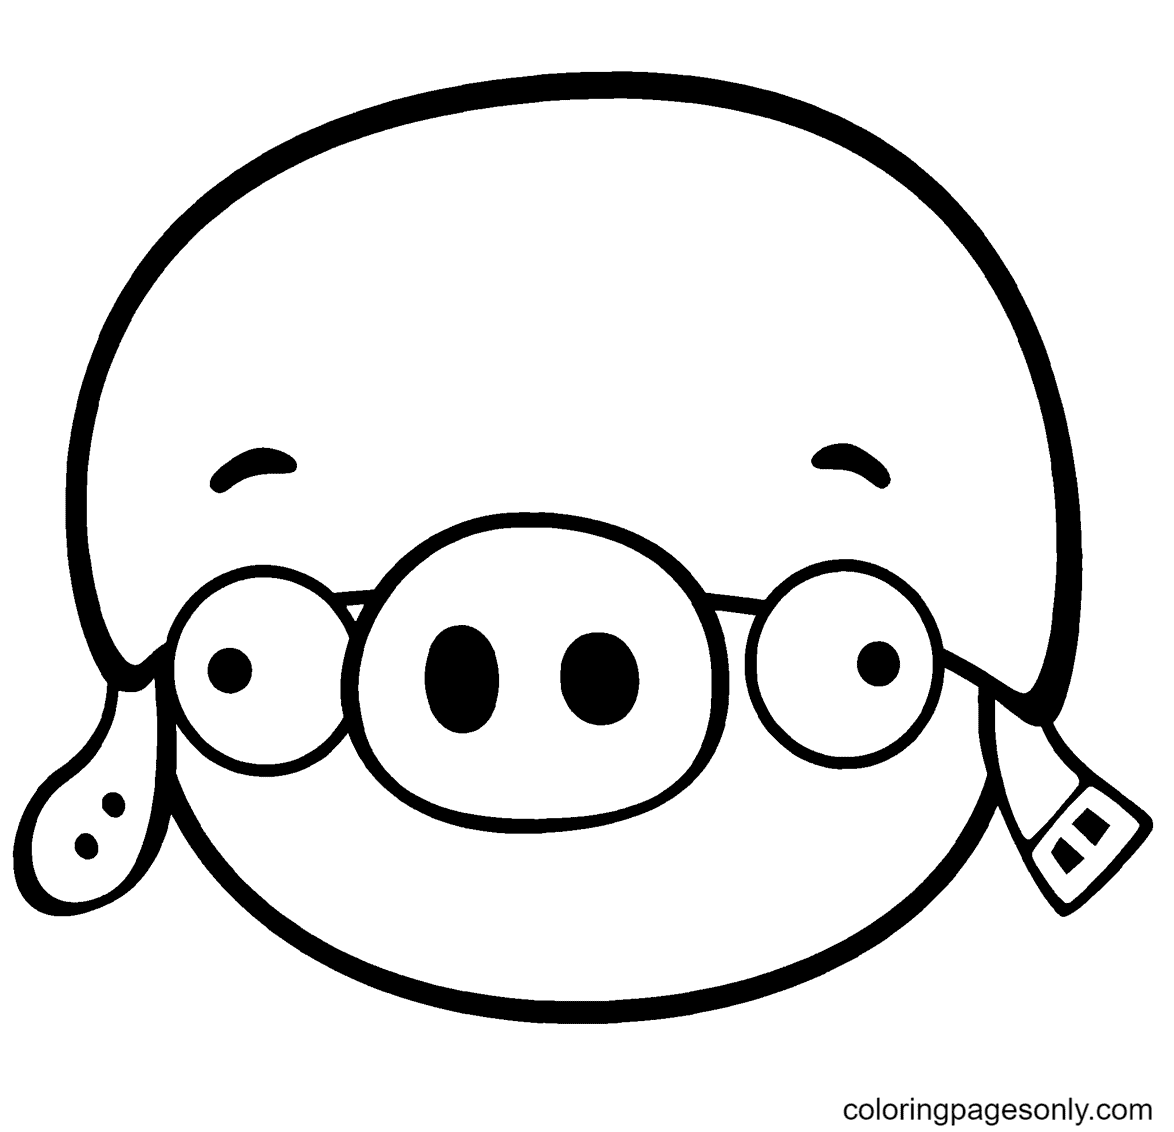 Corporal Pig Coloring Pages